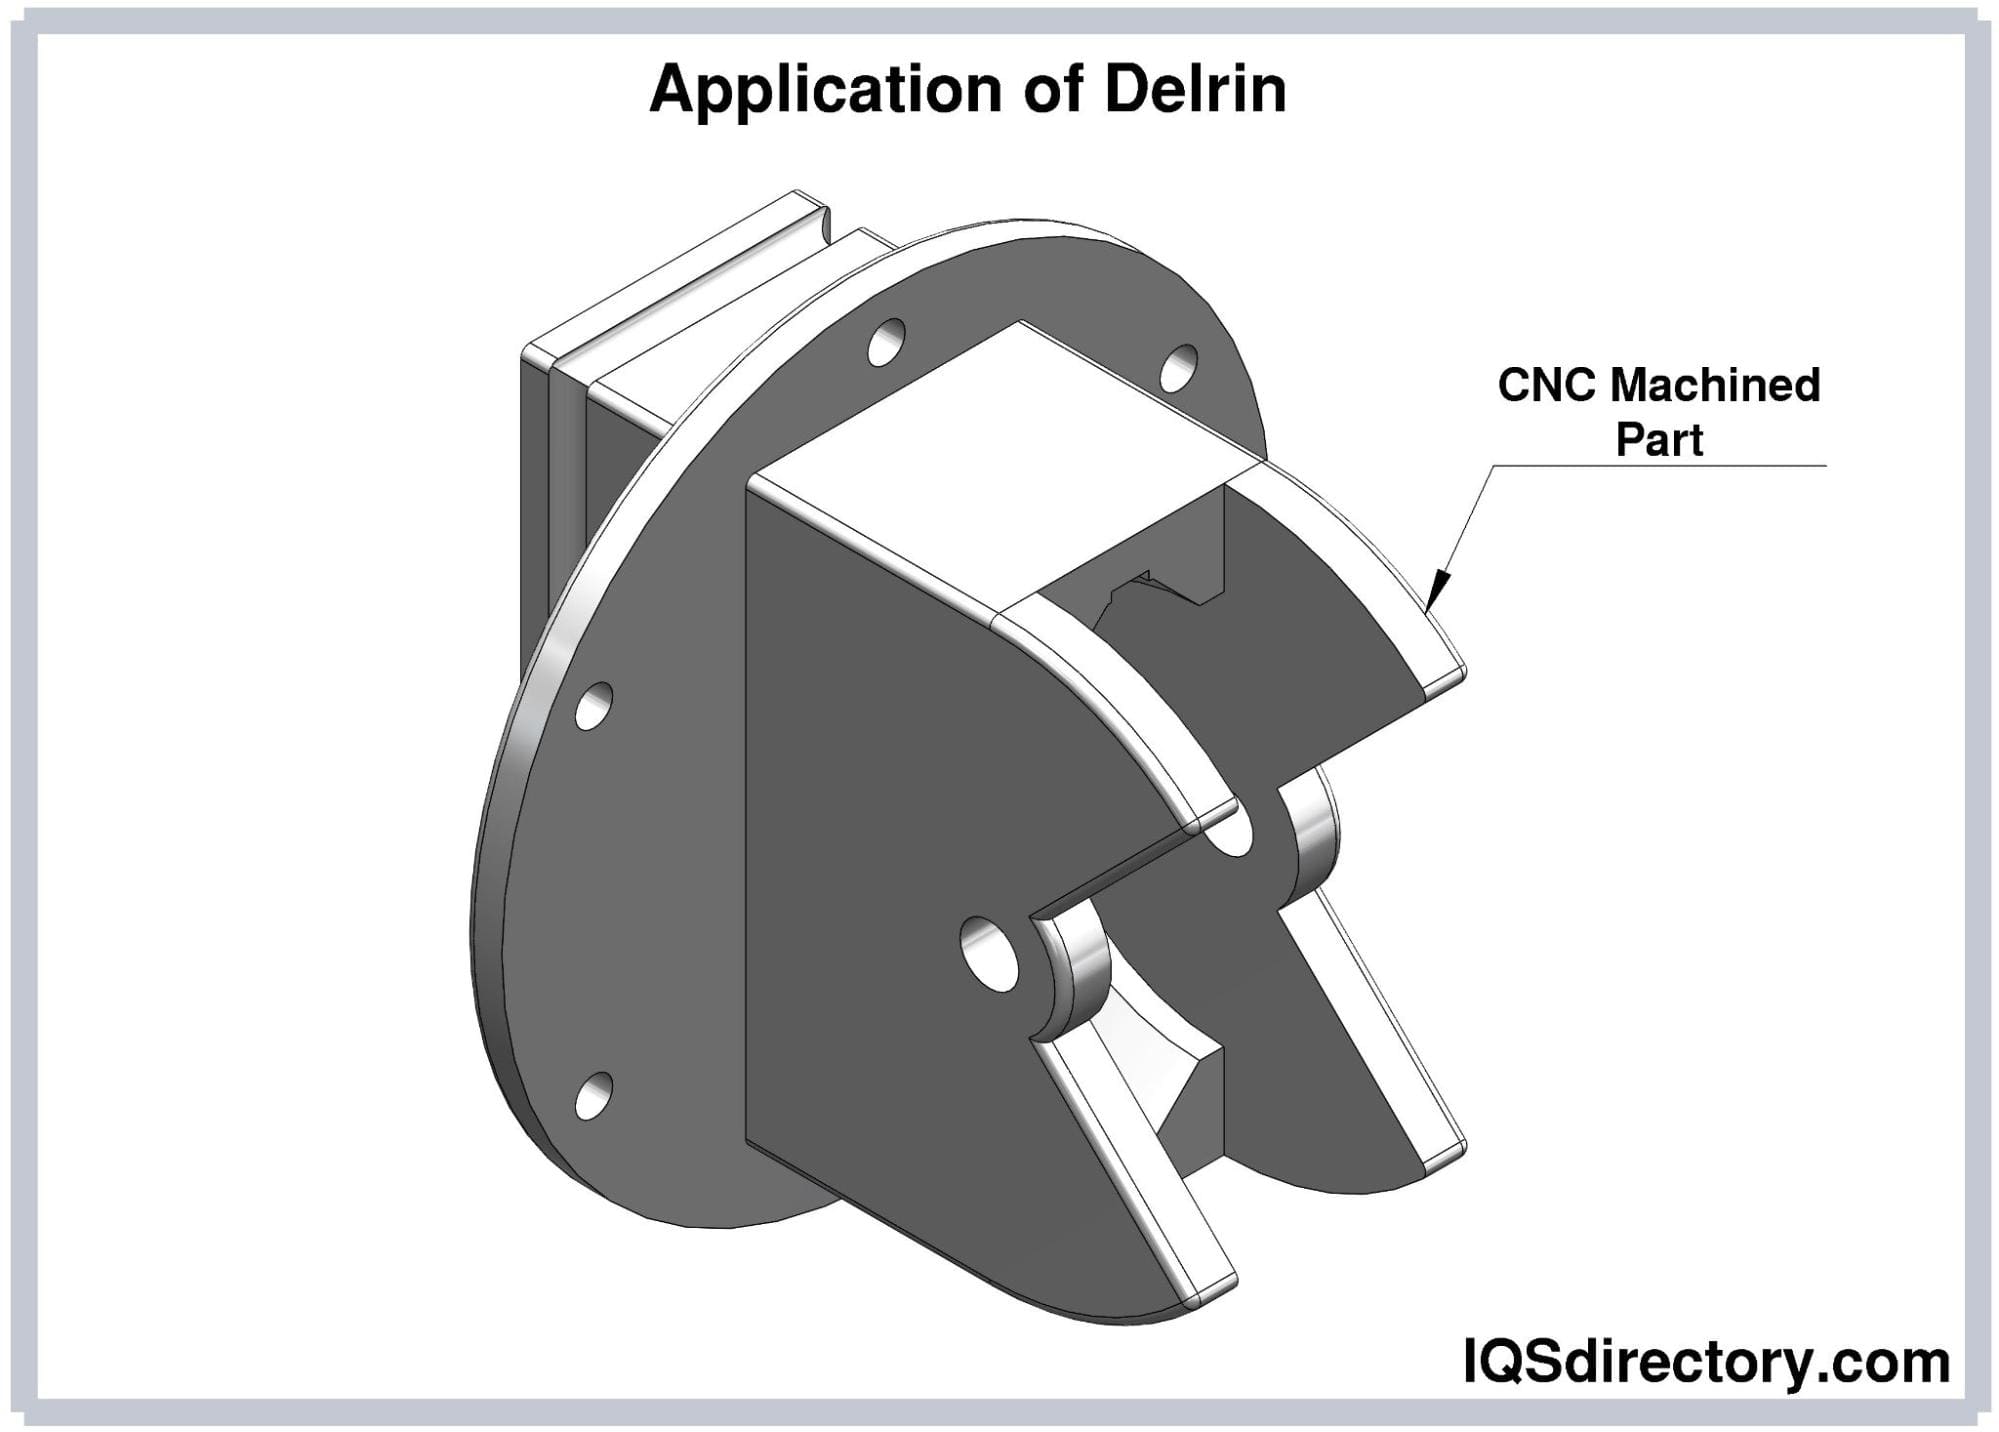 Application of Delrin